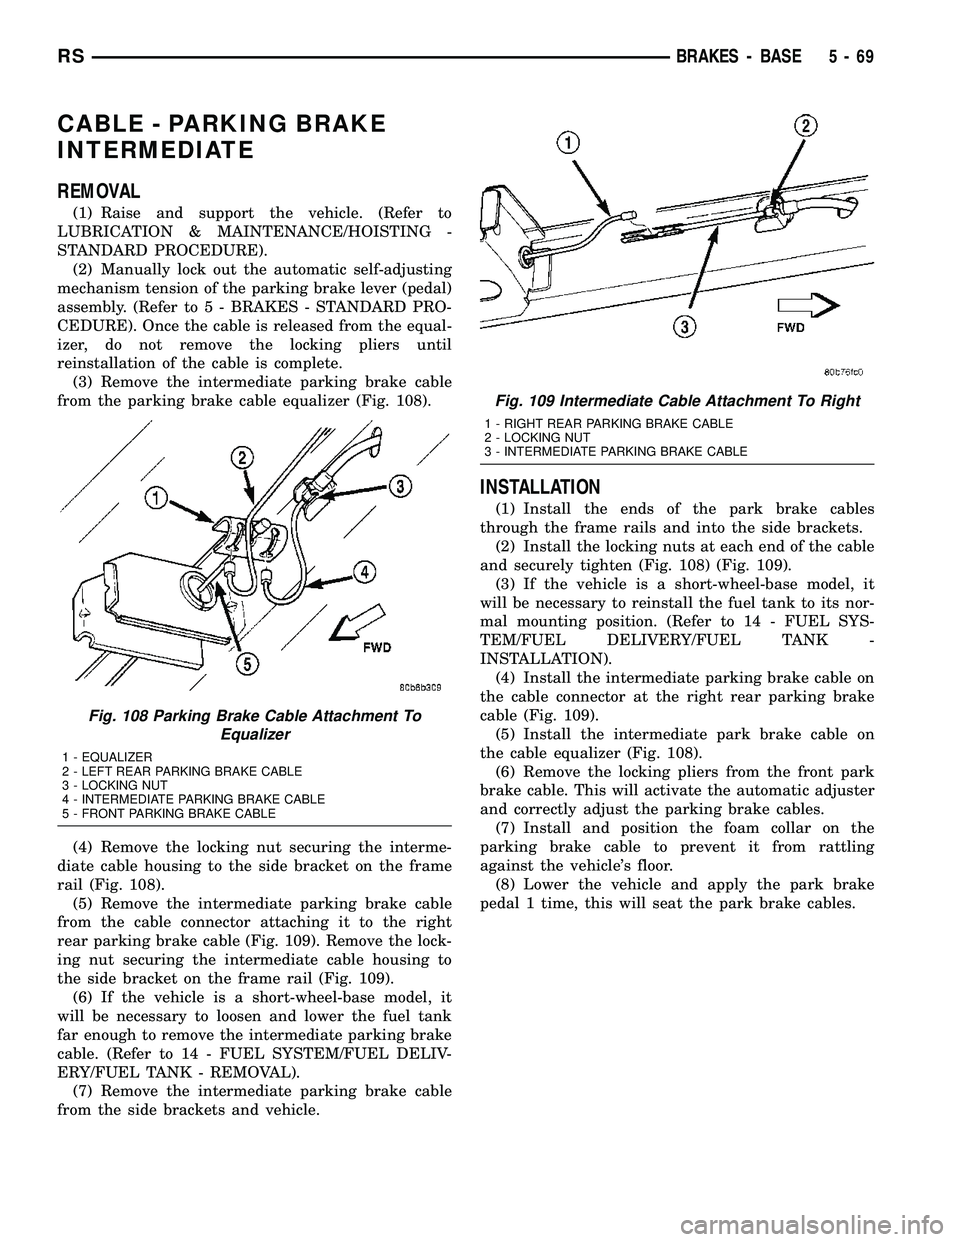 CHRYSLER VOYAGER 2005  Service Manual CABLE - PARKING BRAKE
INTERMEDIATE
REMOVAL
(1) Raise and support the vehicle. (Refer to
LUBRICATION & MAINTENANCE/HOISTING -
STANDARD PROCEDURE).
(2) Manually lock out the automatic self-adjusting
mec